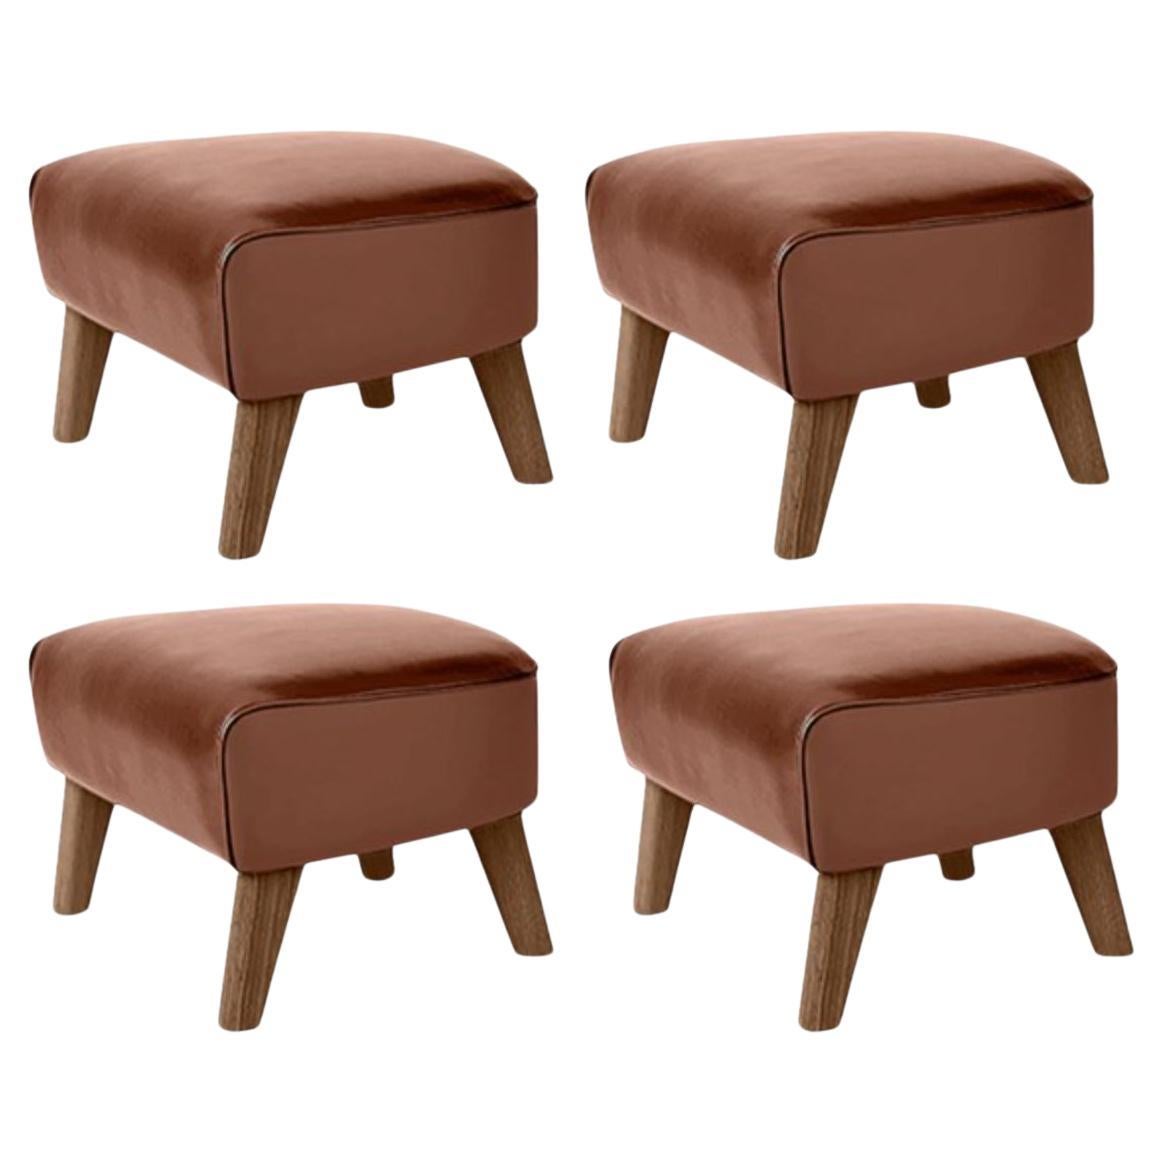 Set of 4 Brown Leather and Smoked Oak My Own Chair Footstools by Lassen For Sale